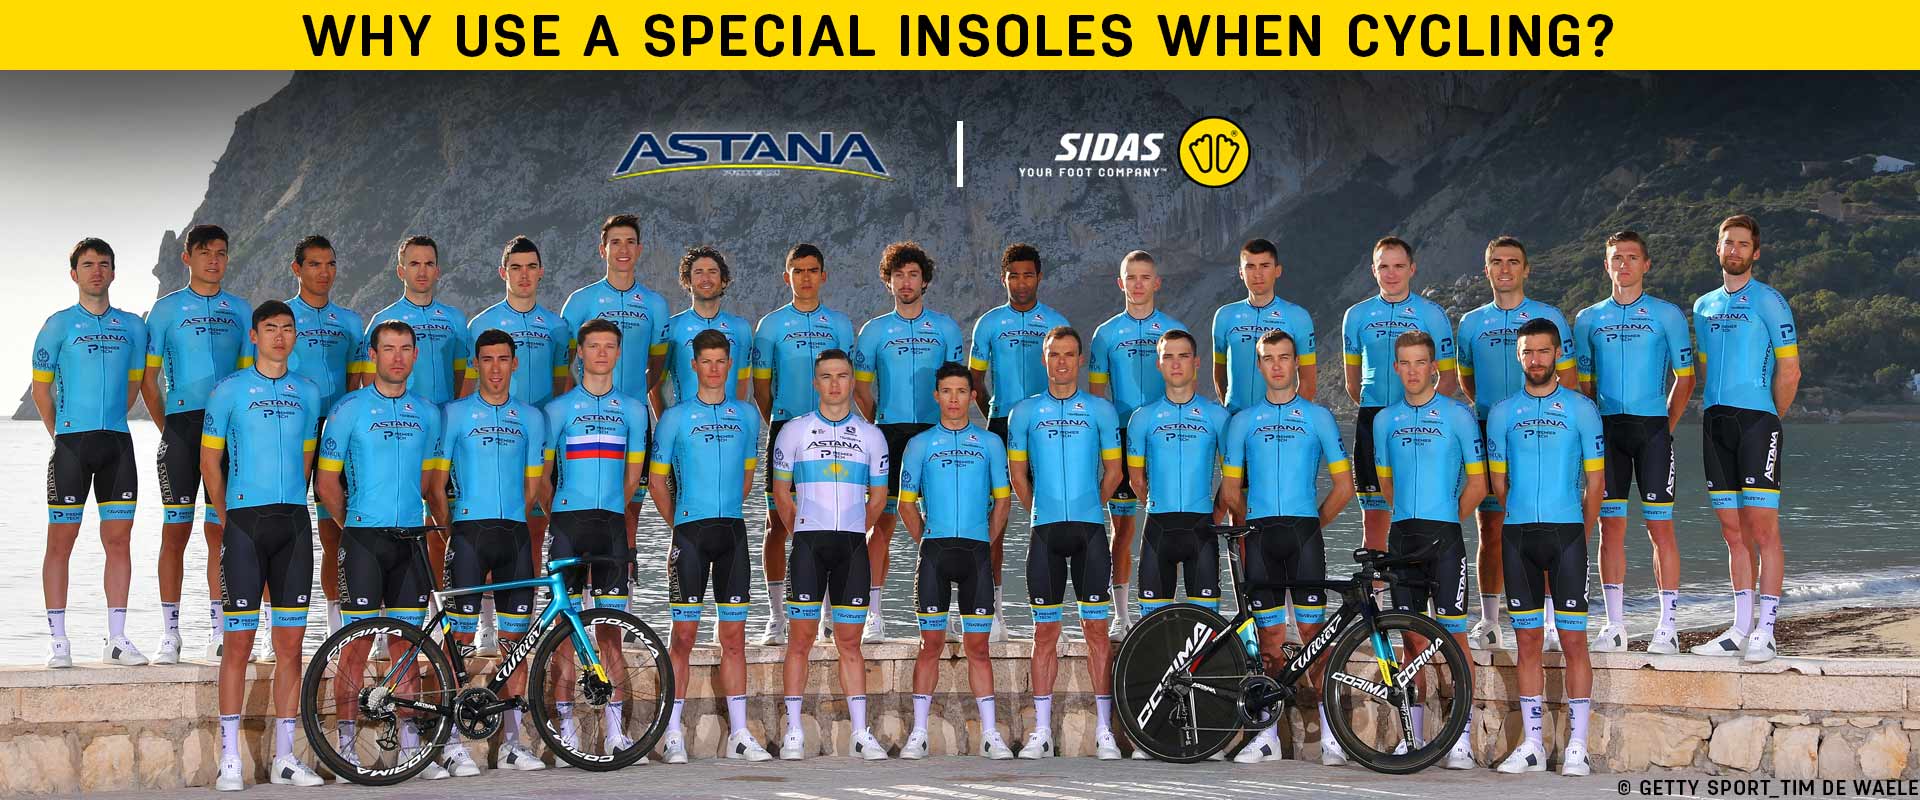 Why use a special insoles when cycling?